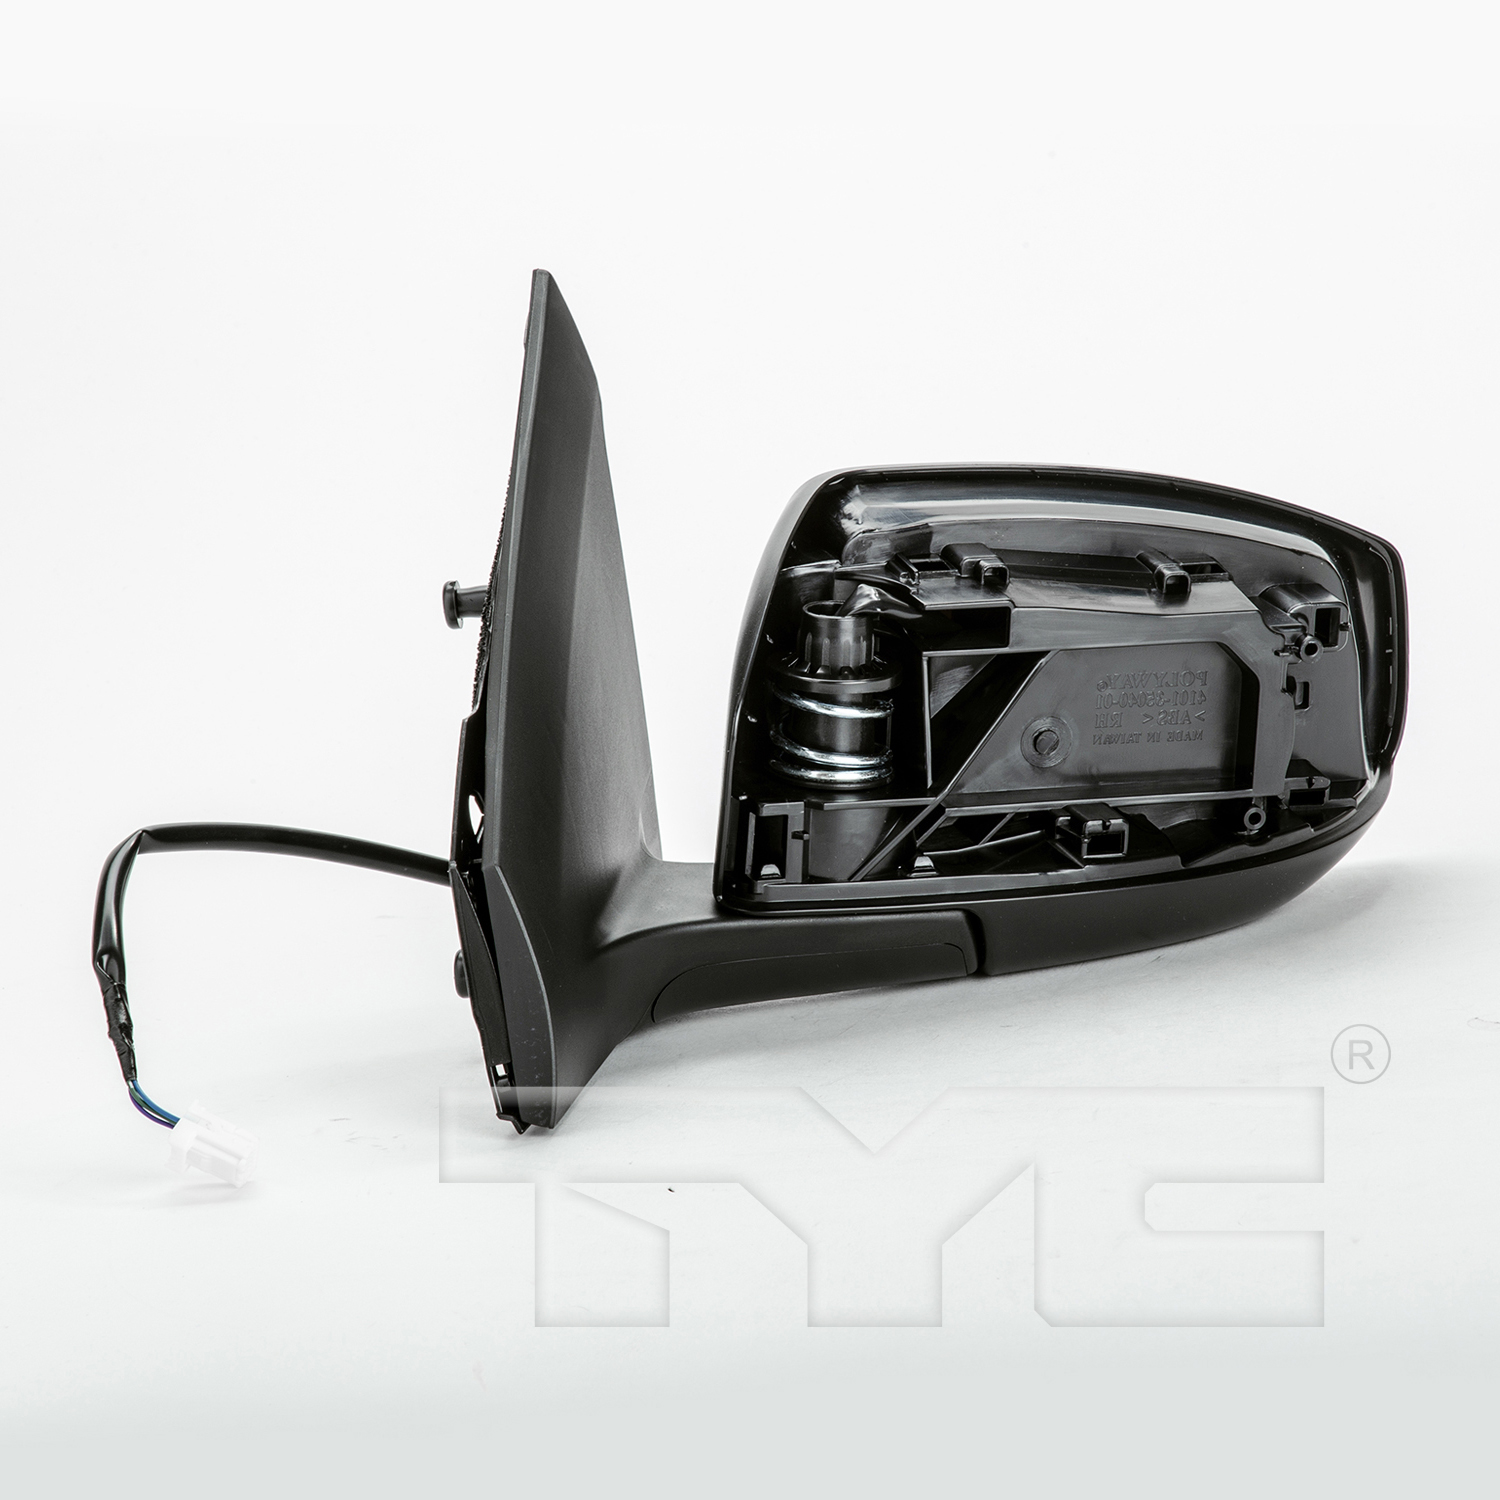 Aftermarket MIRRORS for NISSAN - SENTRA, SENTRA,13-13,LT Mirror outside rear view